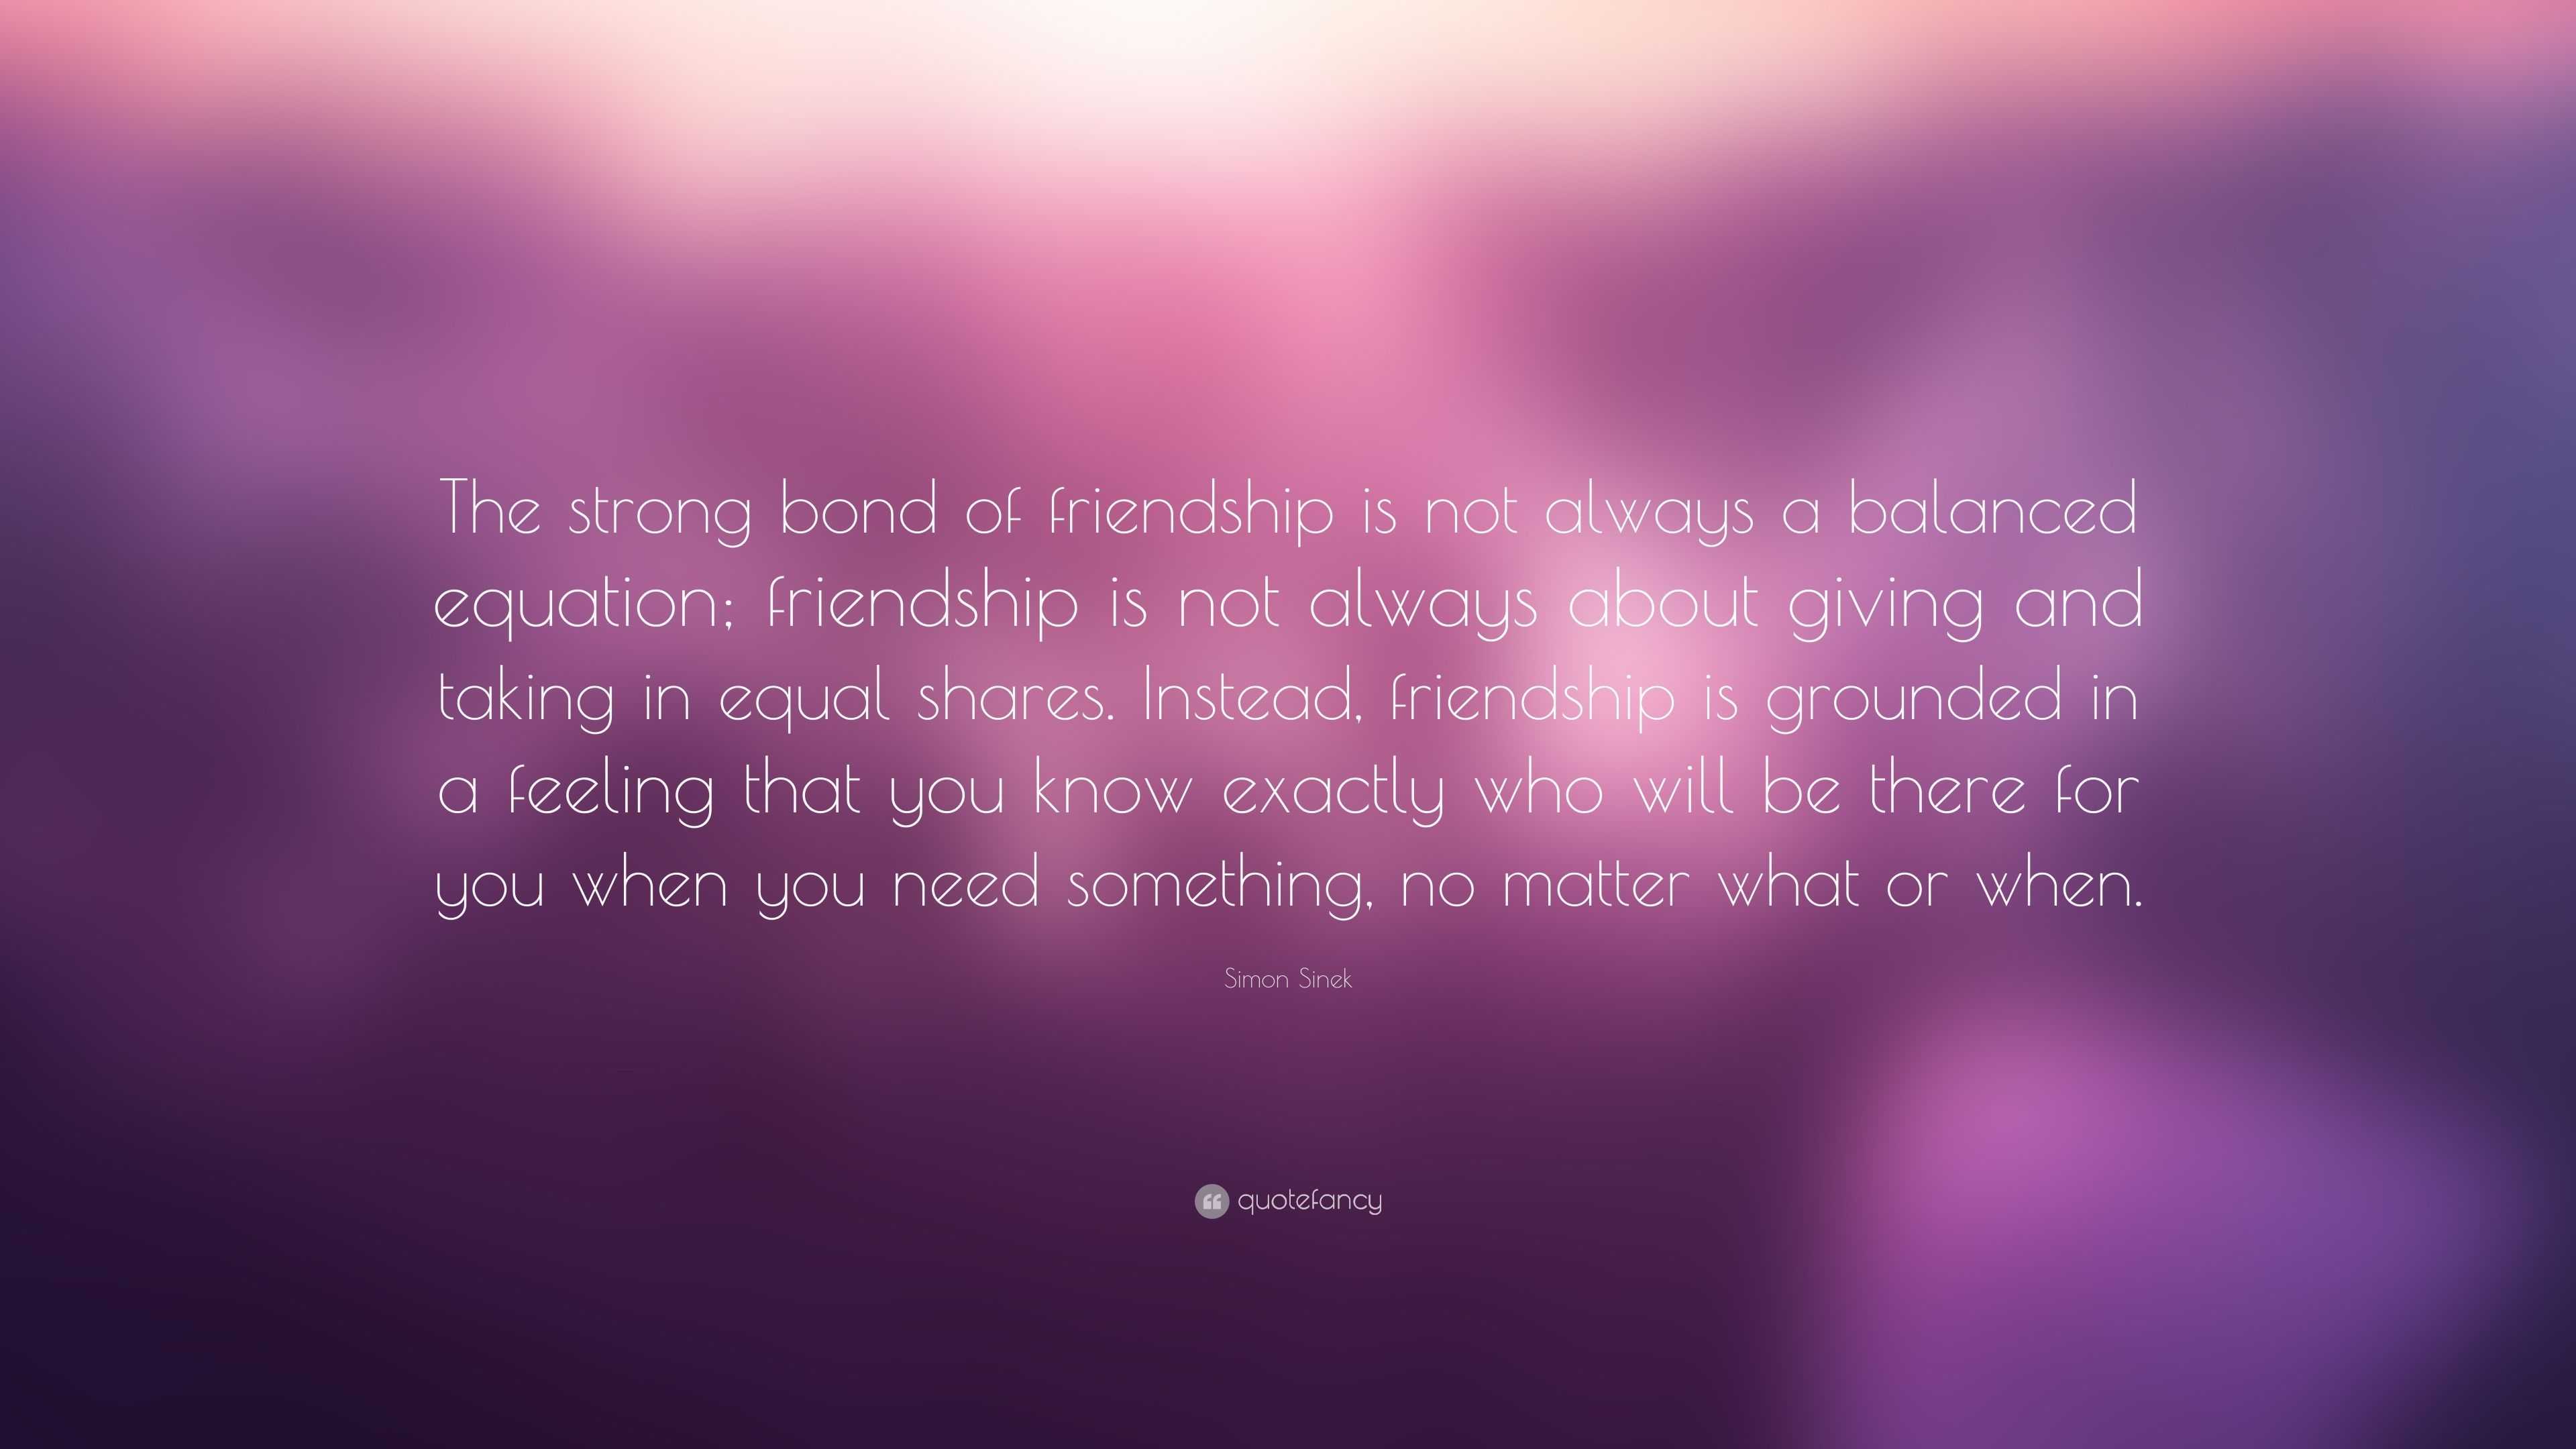 Simon Sinek Quote: “The strong bond of friendship is not always a